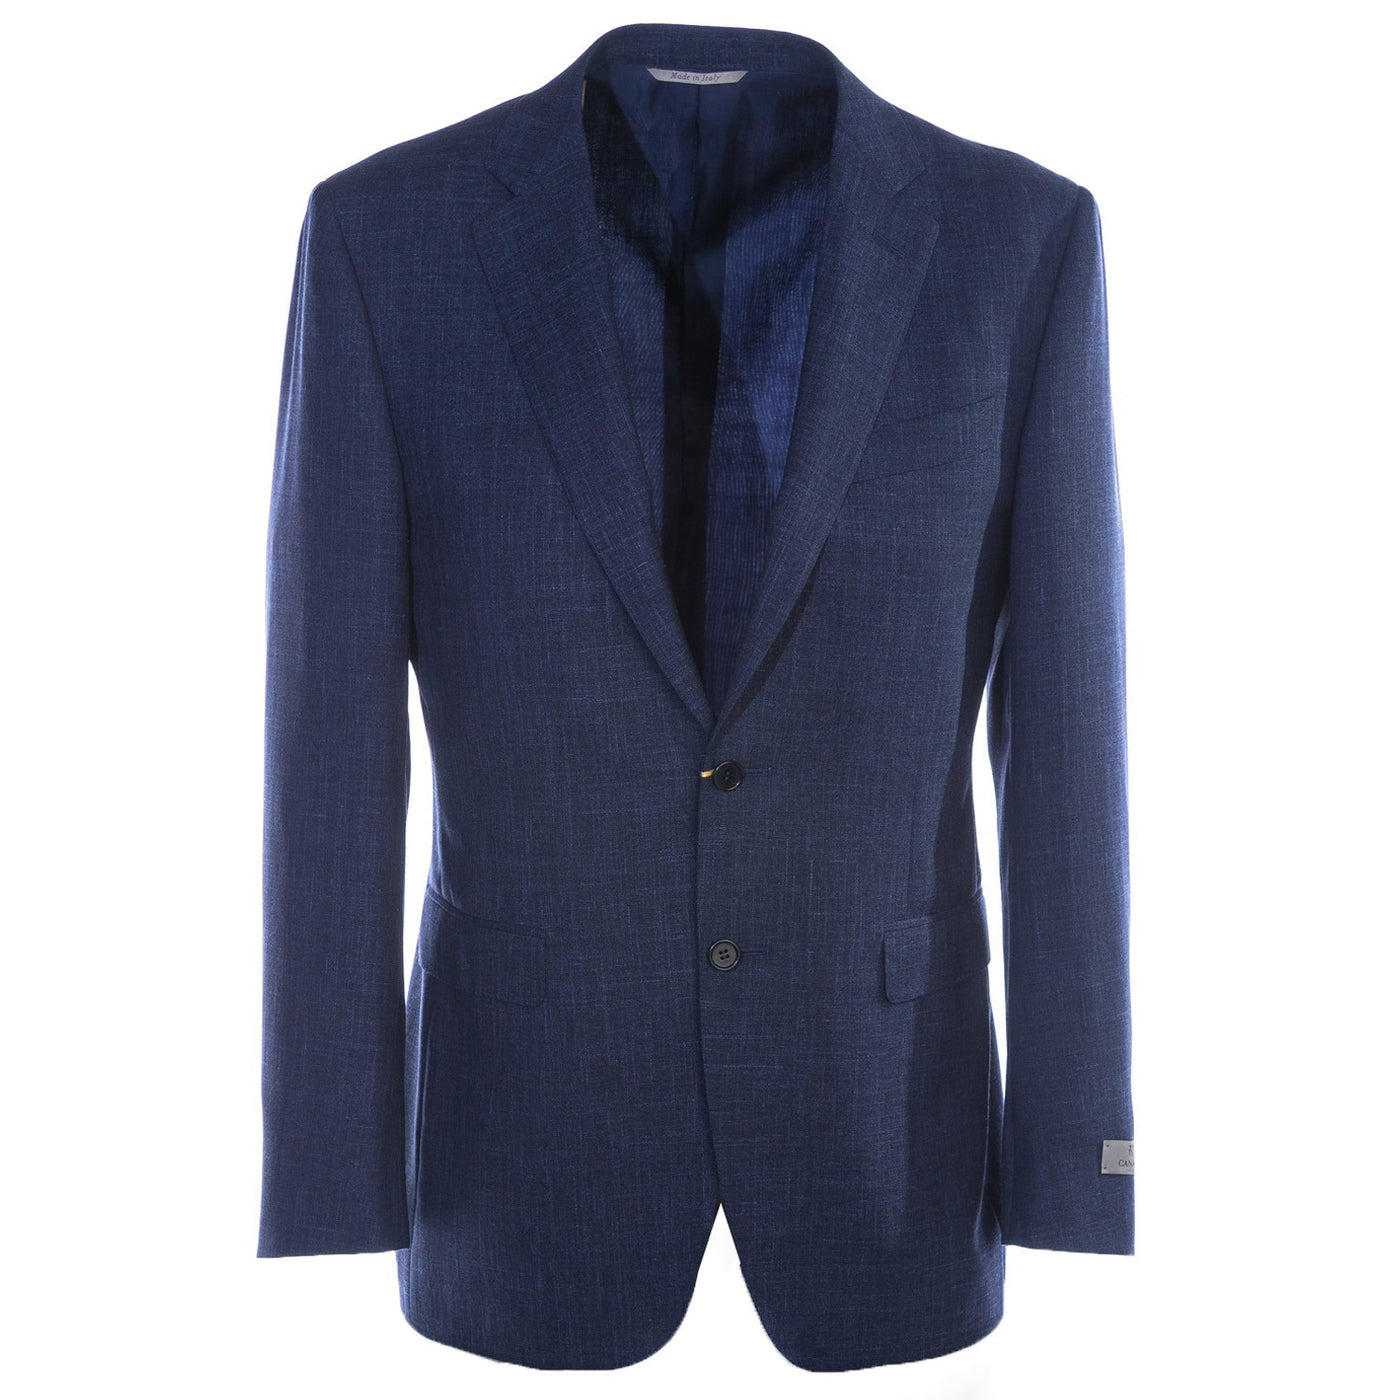 Canali Linen Mix Travel Suit in Midnight Blue Jacket